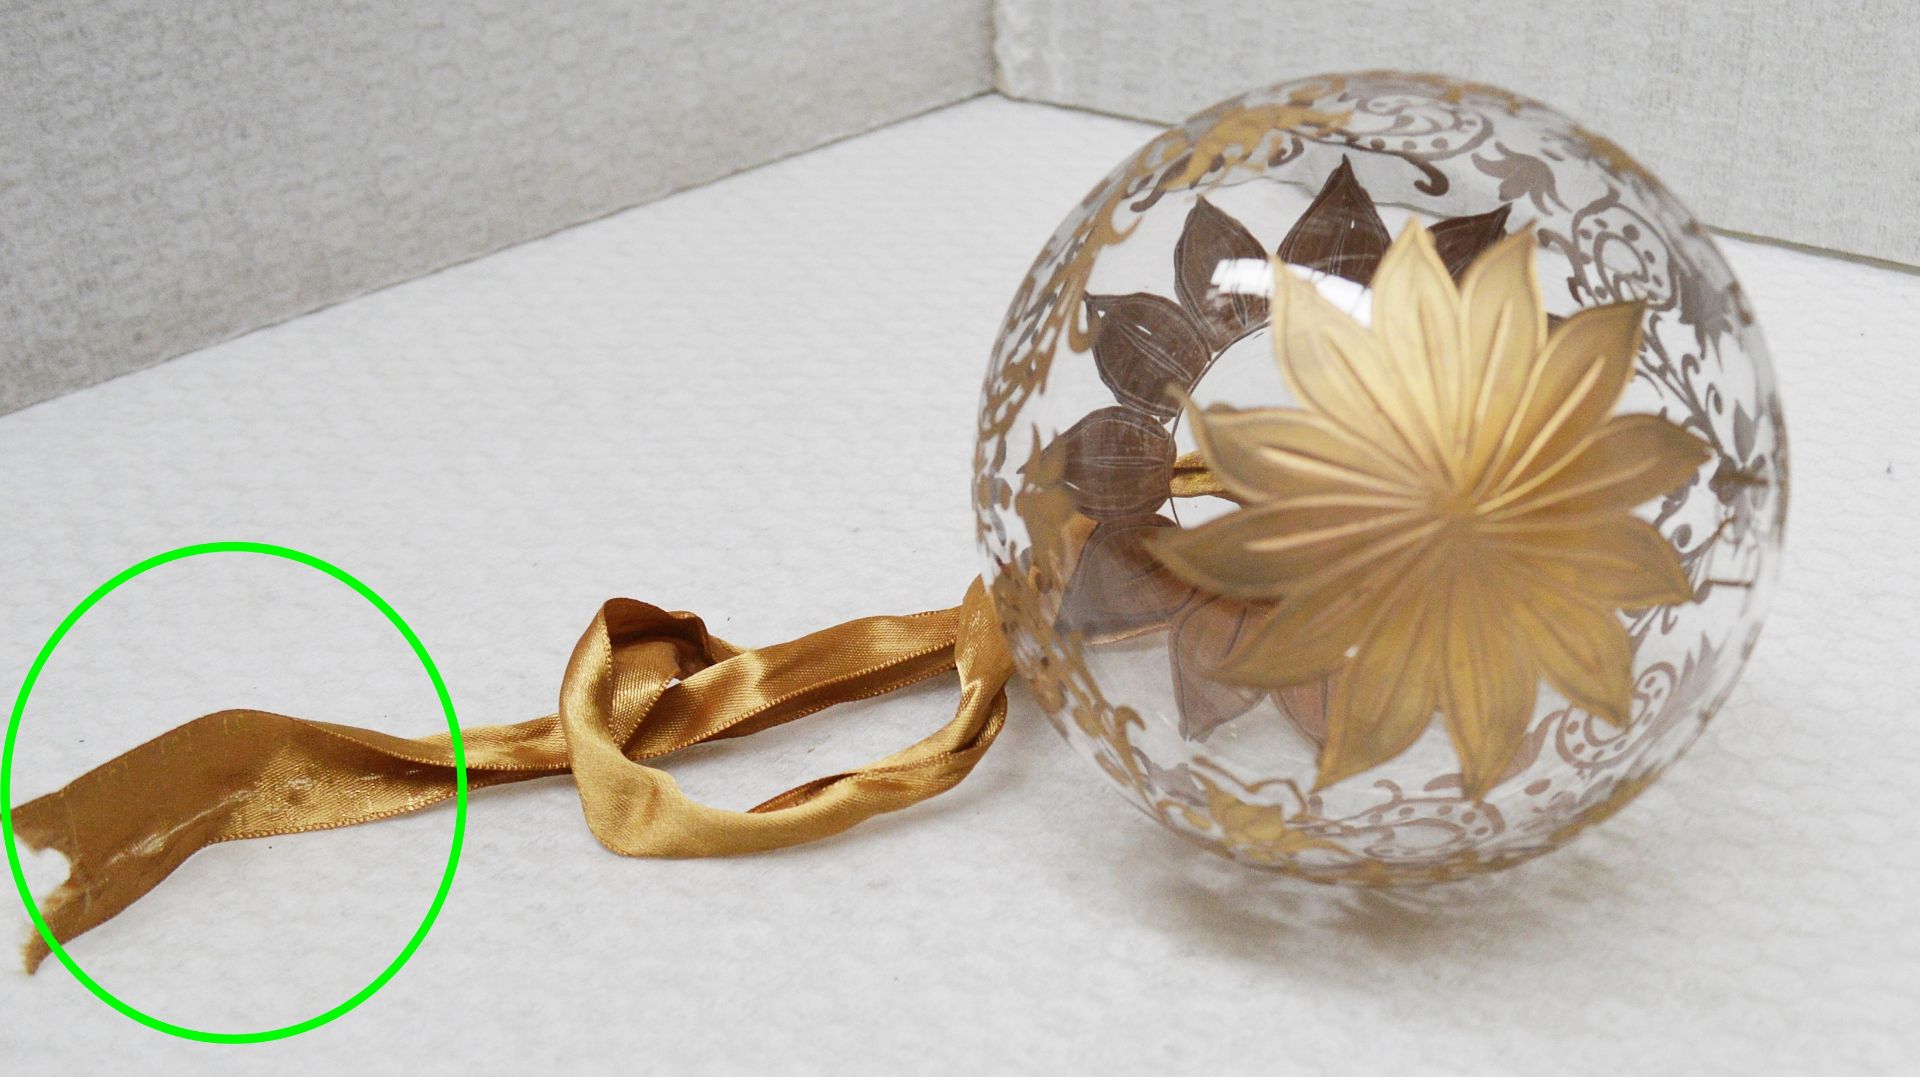 1 x BALDI 'Home Jewels' Italian Hand-crafted Artisan Christmas Tree Decoration In Gold - Dimensions: - Image 2 of 4